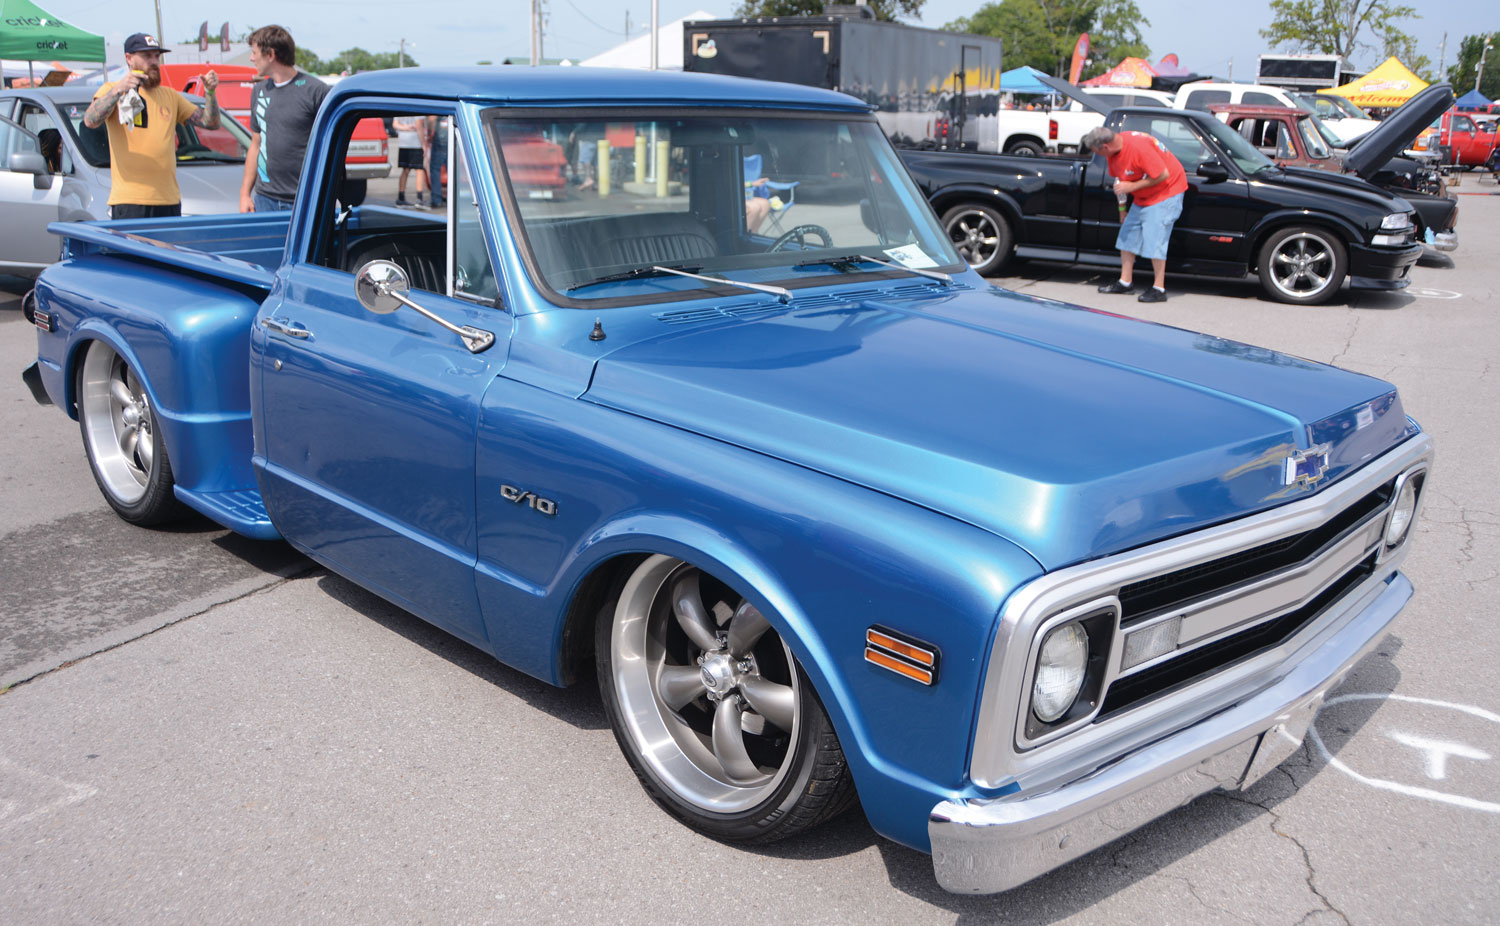 Blue Chevy C-10 side view